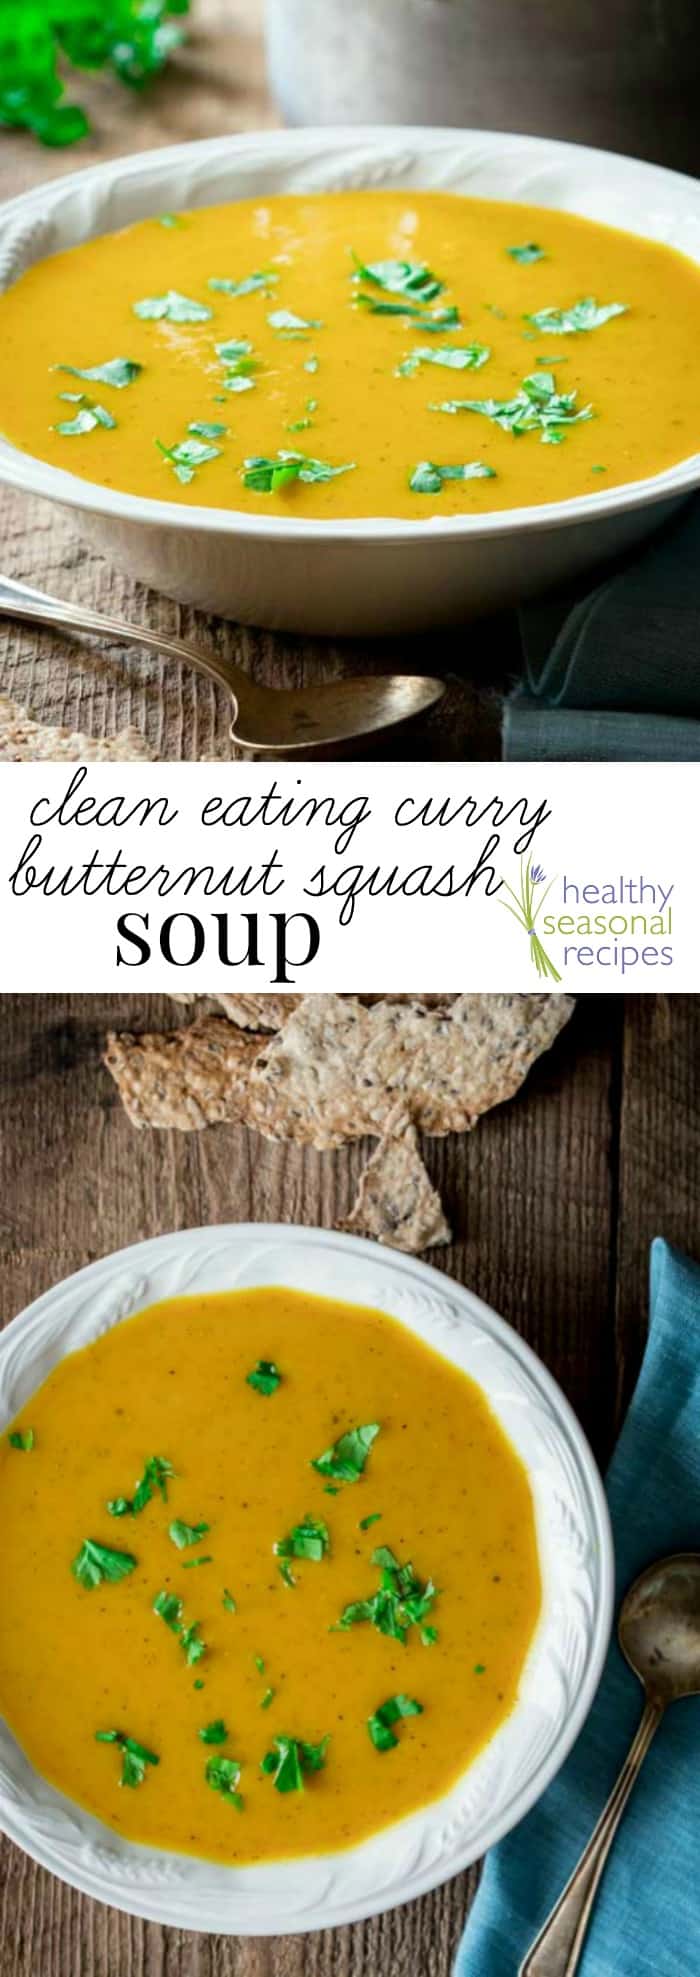 soup collage with text overlay